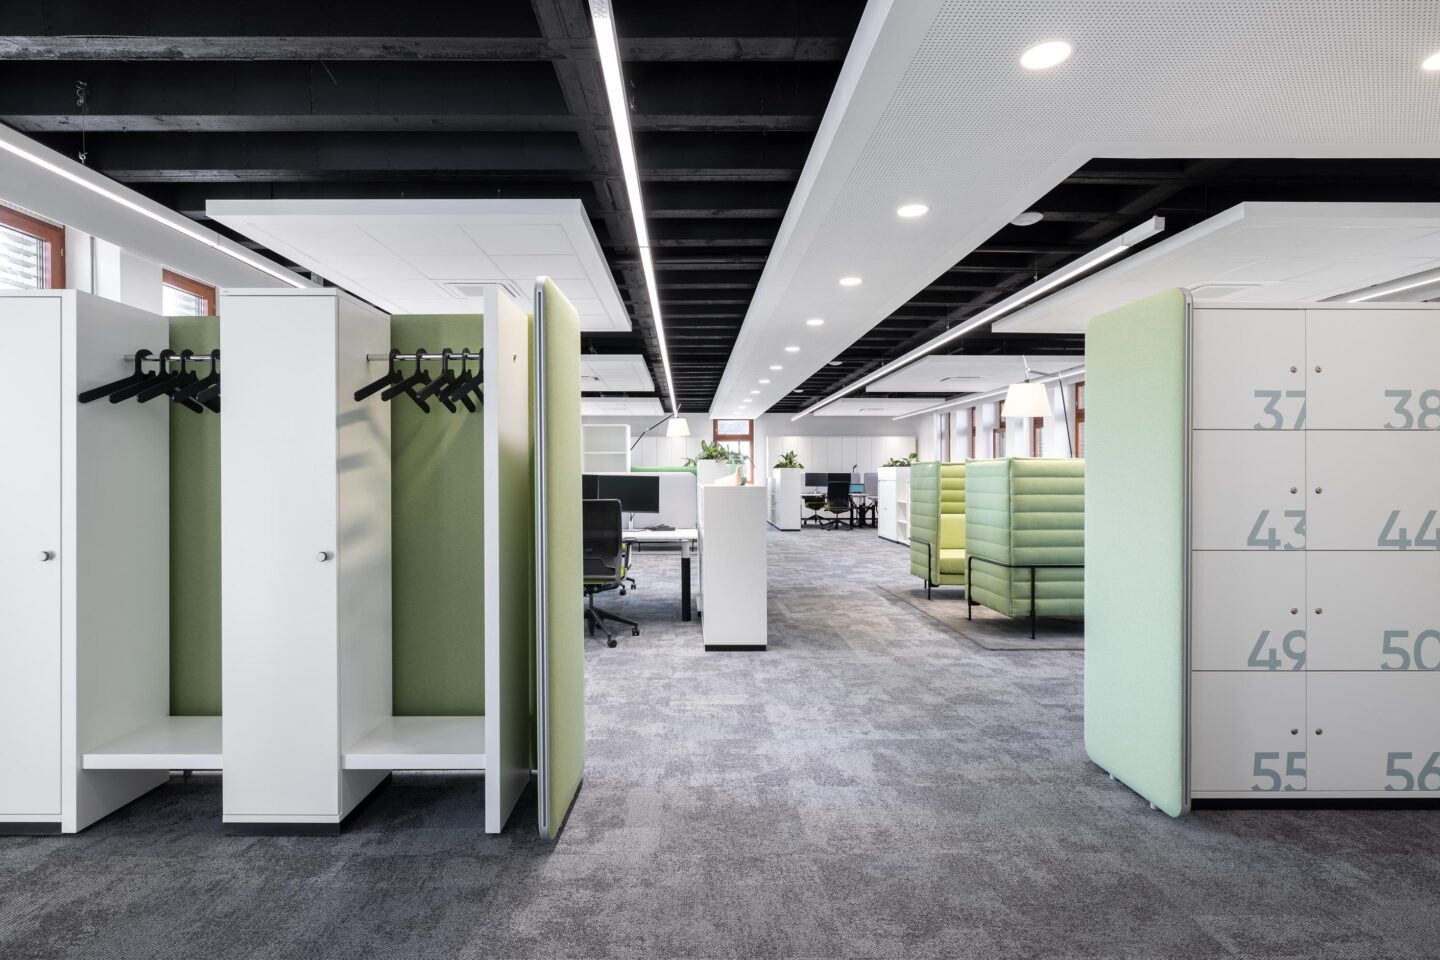 Each office space was given its own colour concept, which is reflected in the upholstery fabrics, carpets and retreat booths